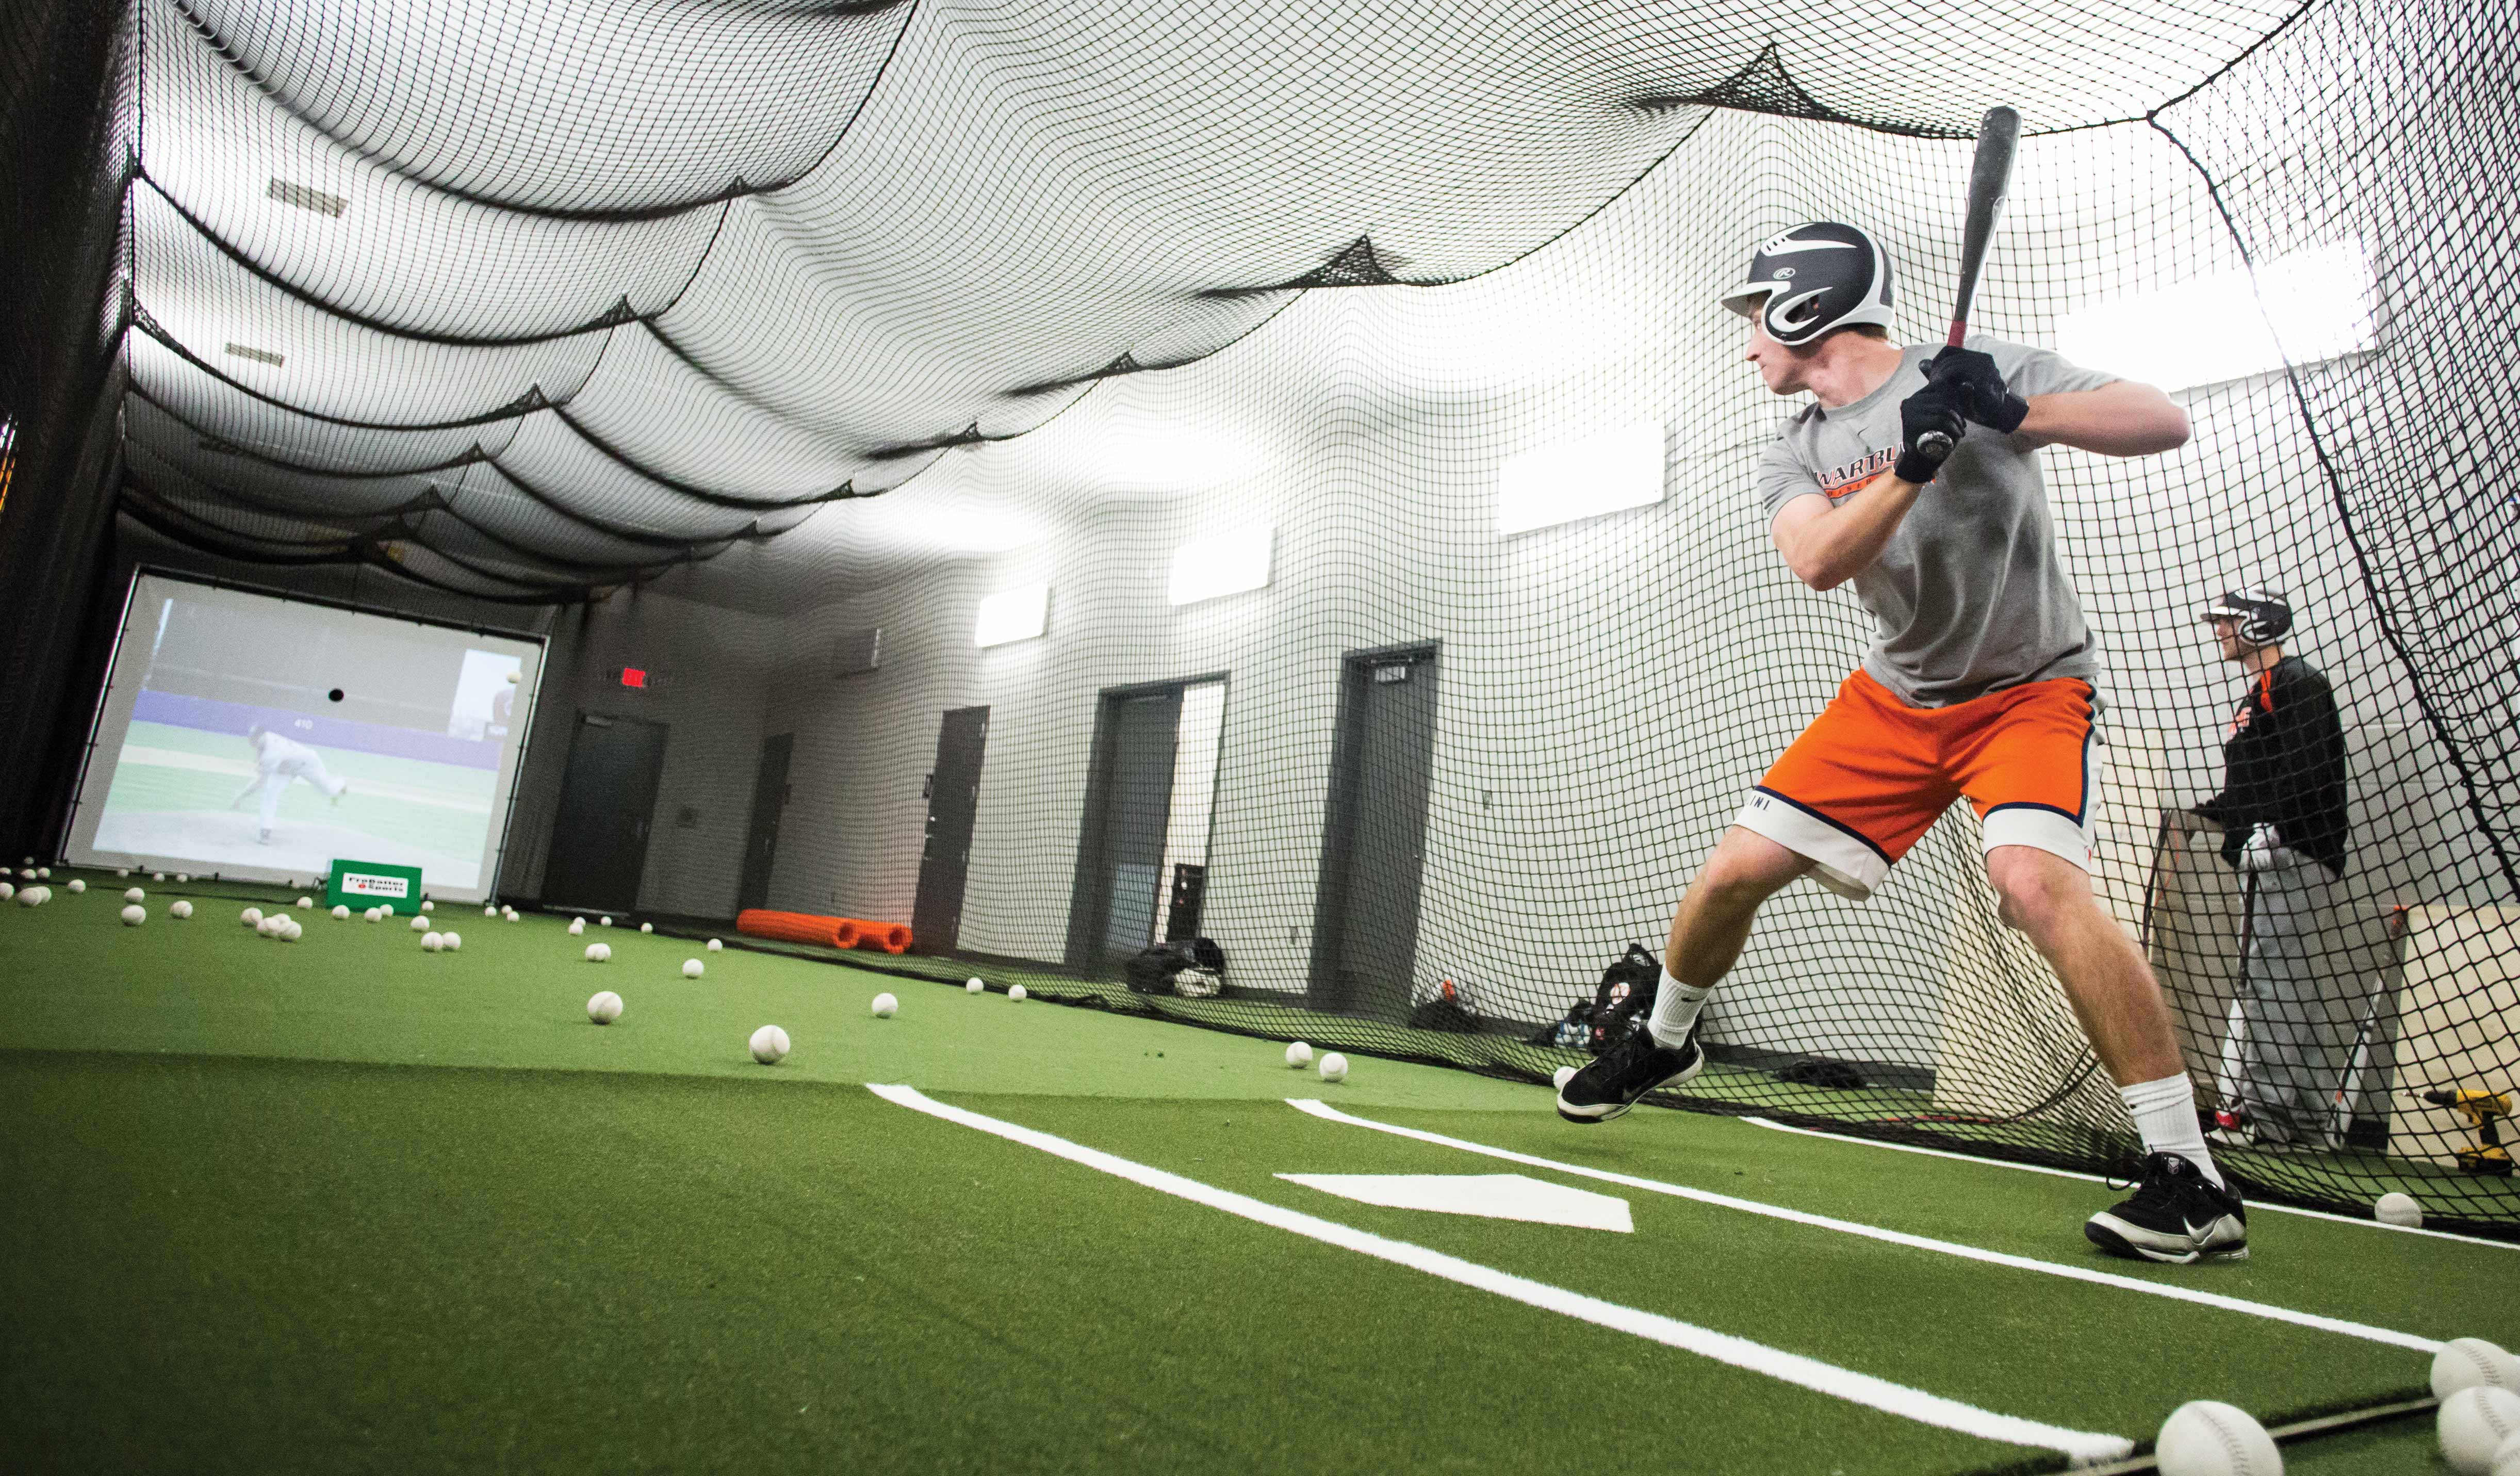 double-play-new-pavilion-improves-experience-for-athletes-fans-wartburg-college